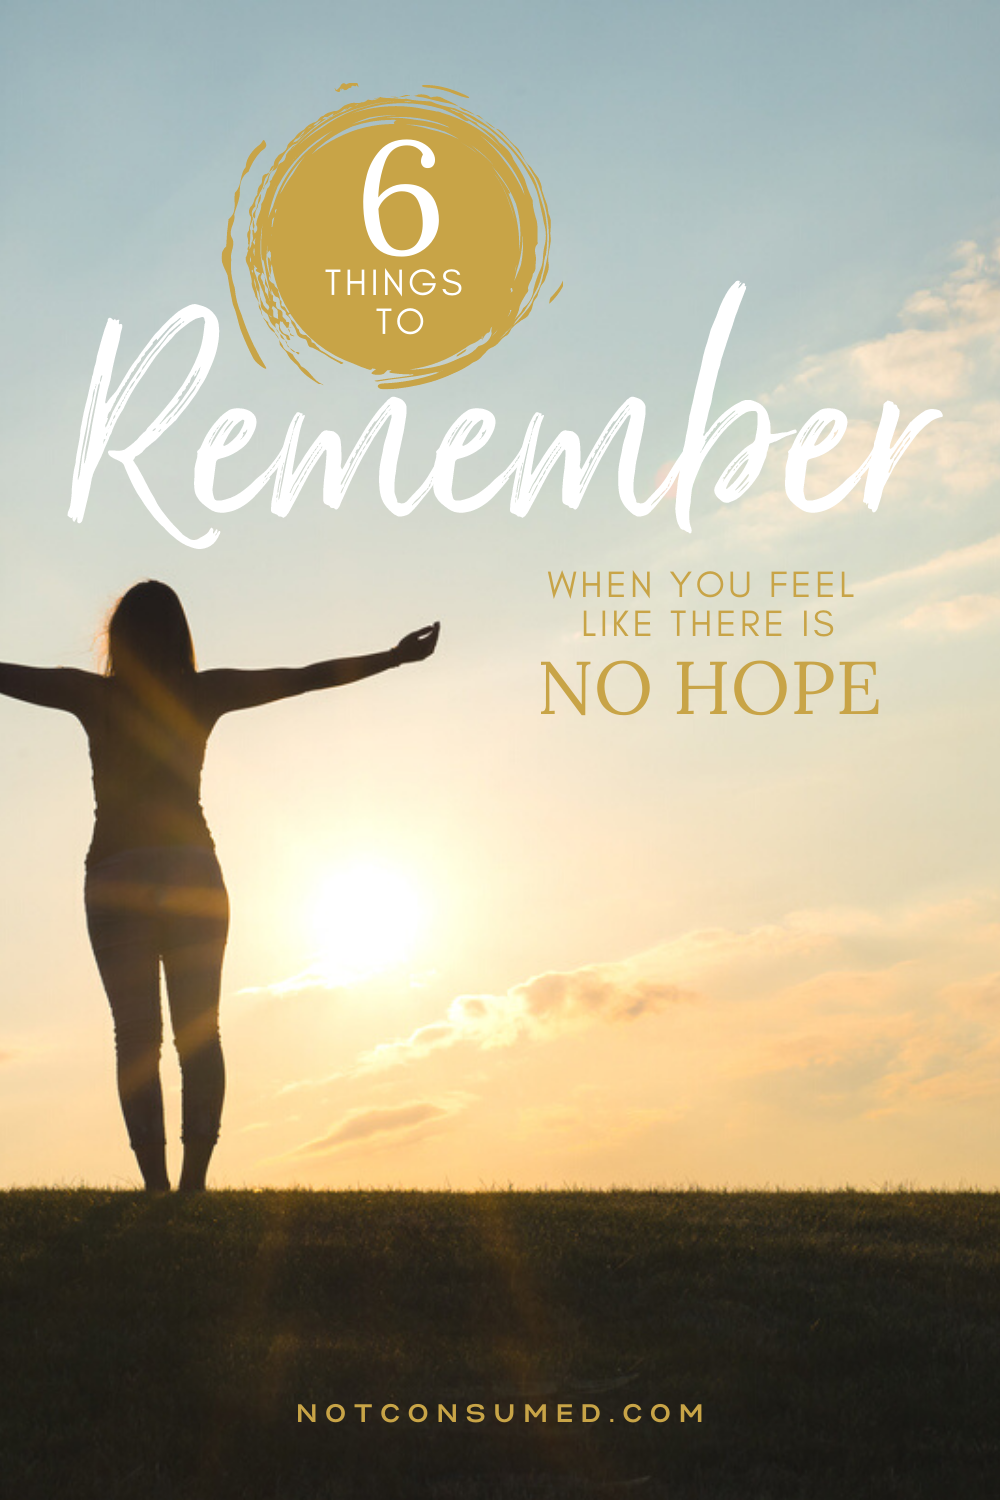 6 Things to Remember When You Feel Like There is No Hope